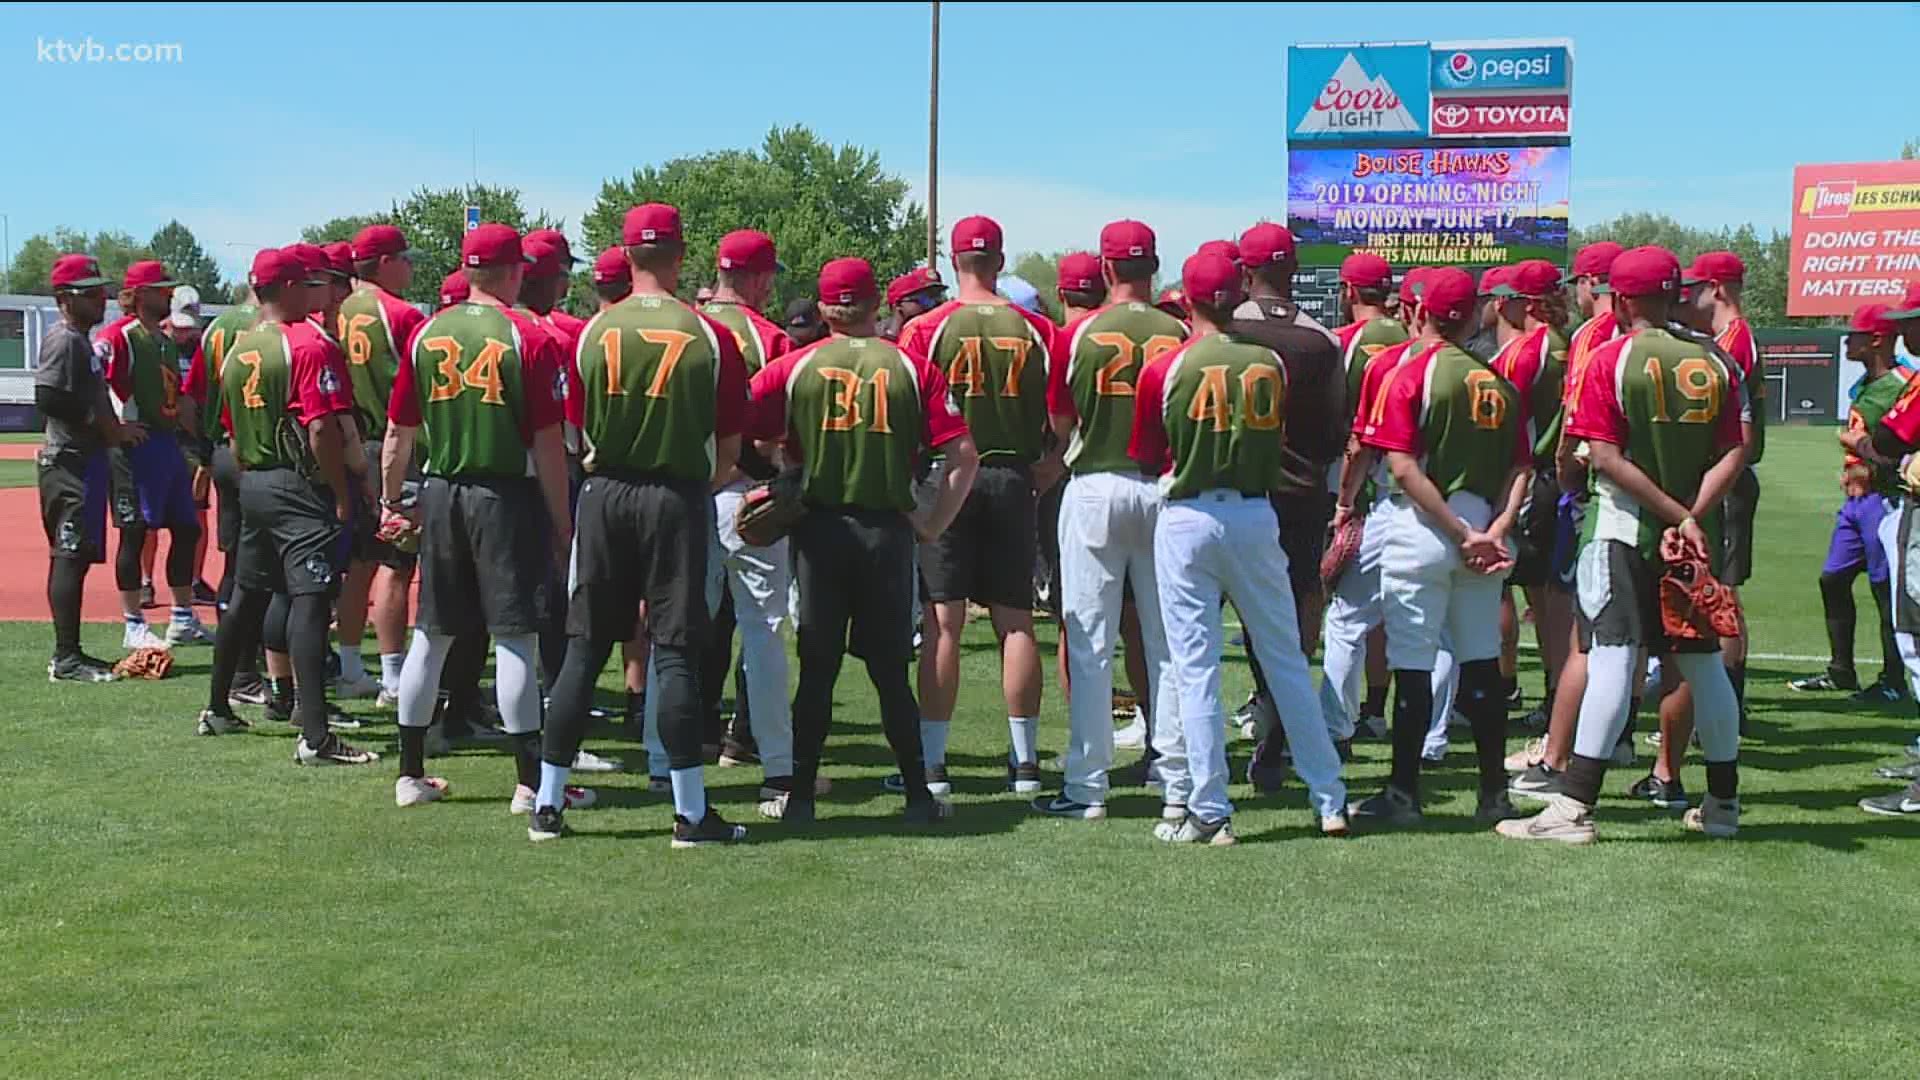 Boise Hawks team president blames lack of new stadium for why the team lost minor-league affiliation ktvb